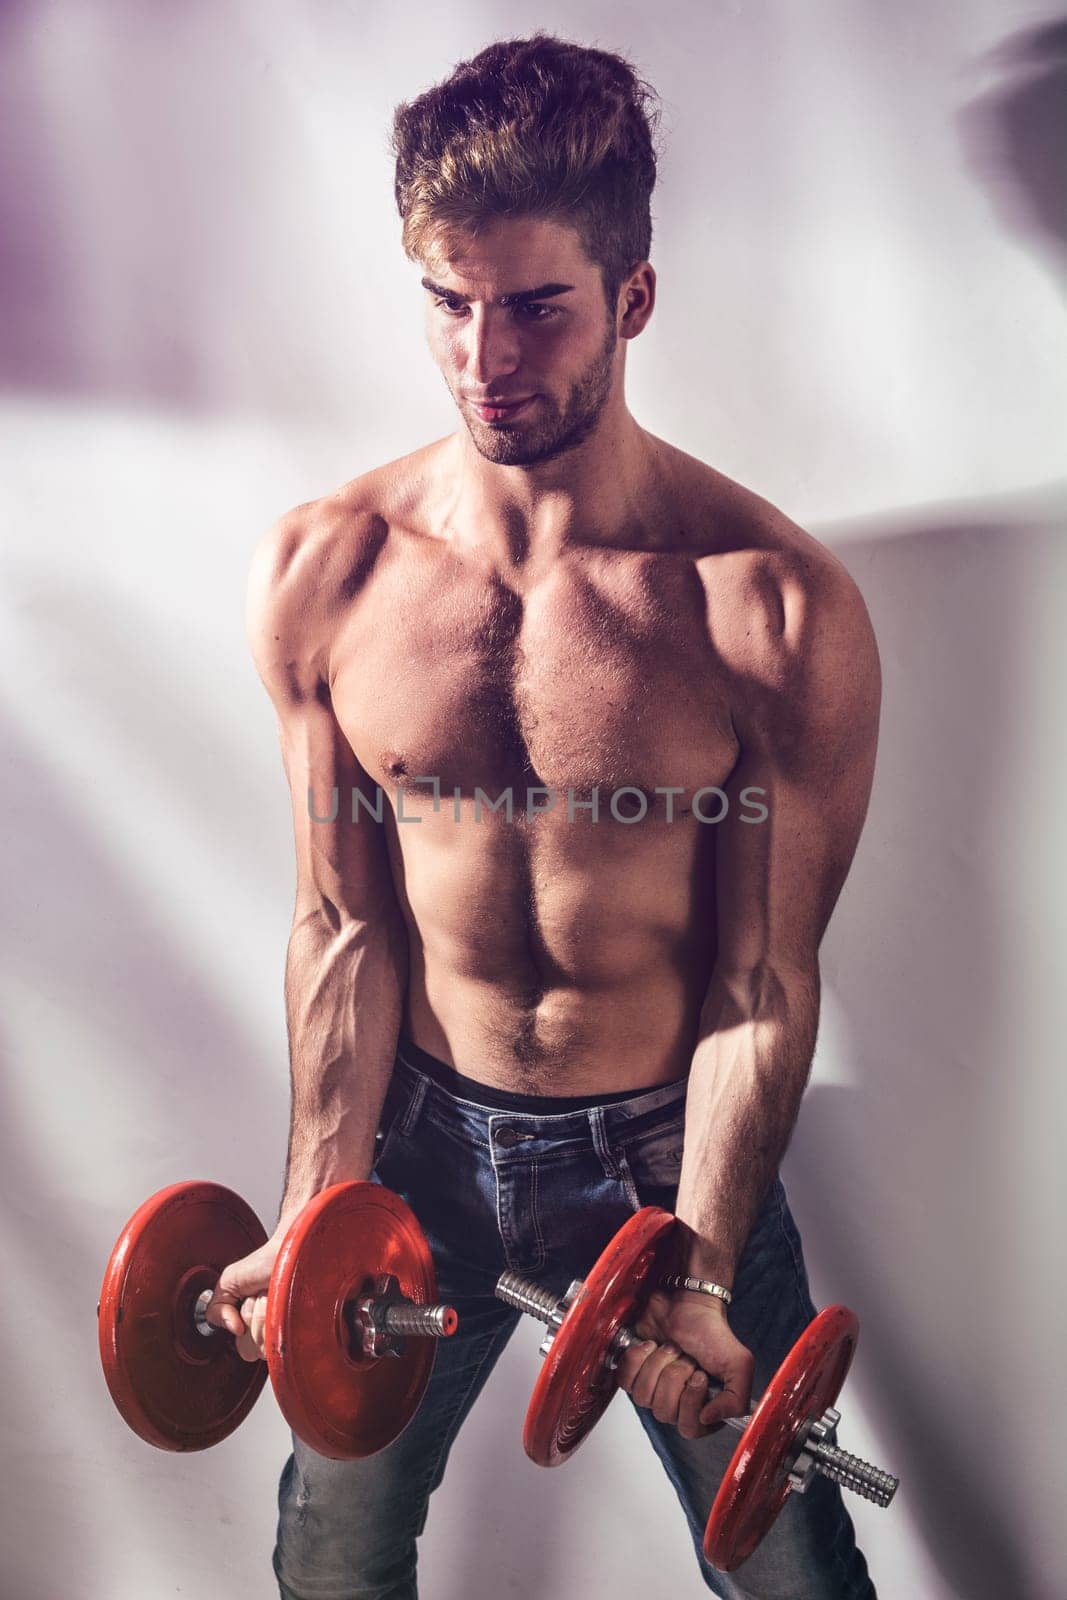 A shirtless man holding two red dumbs